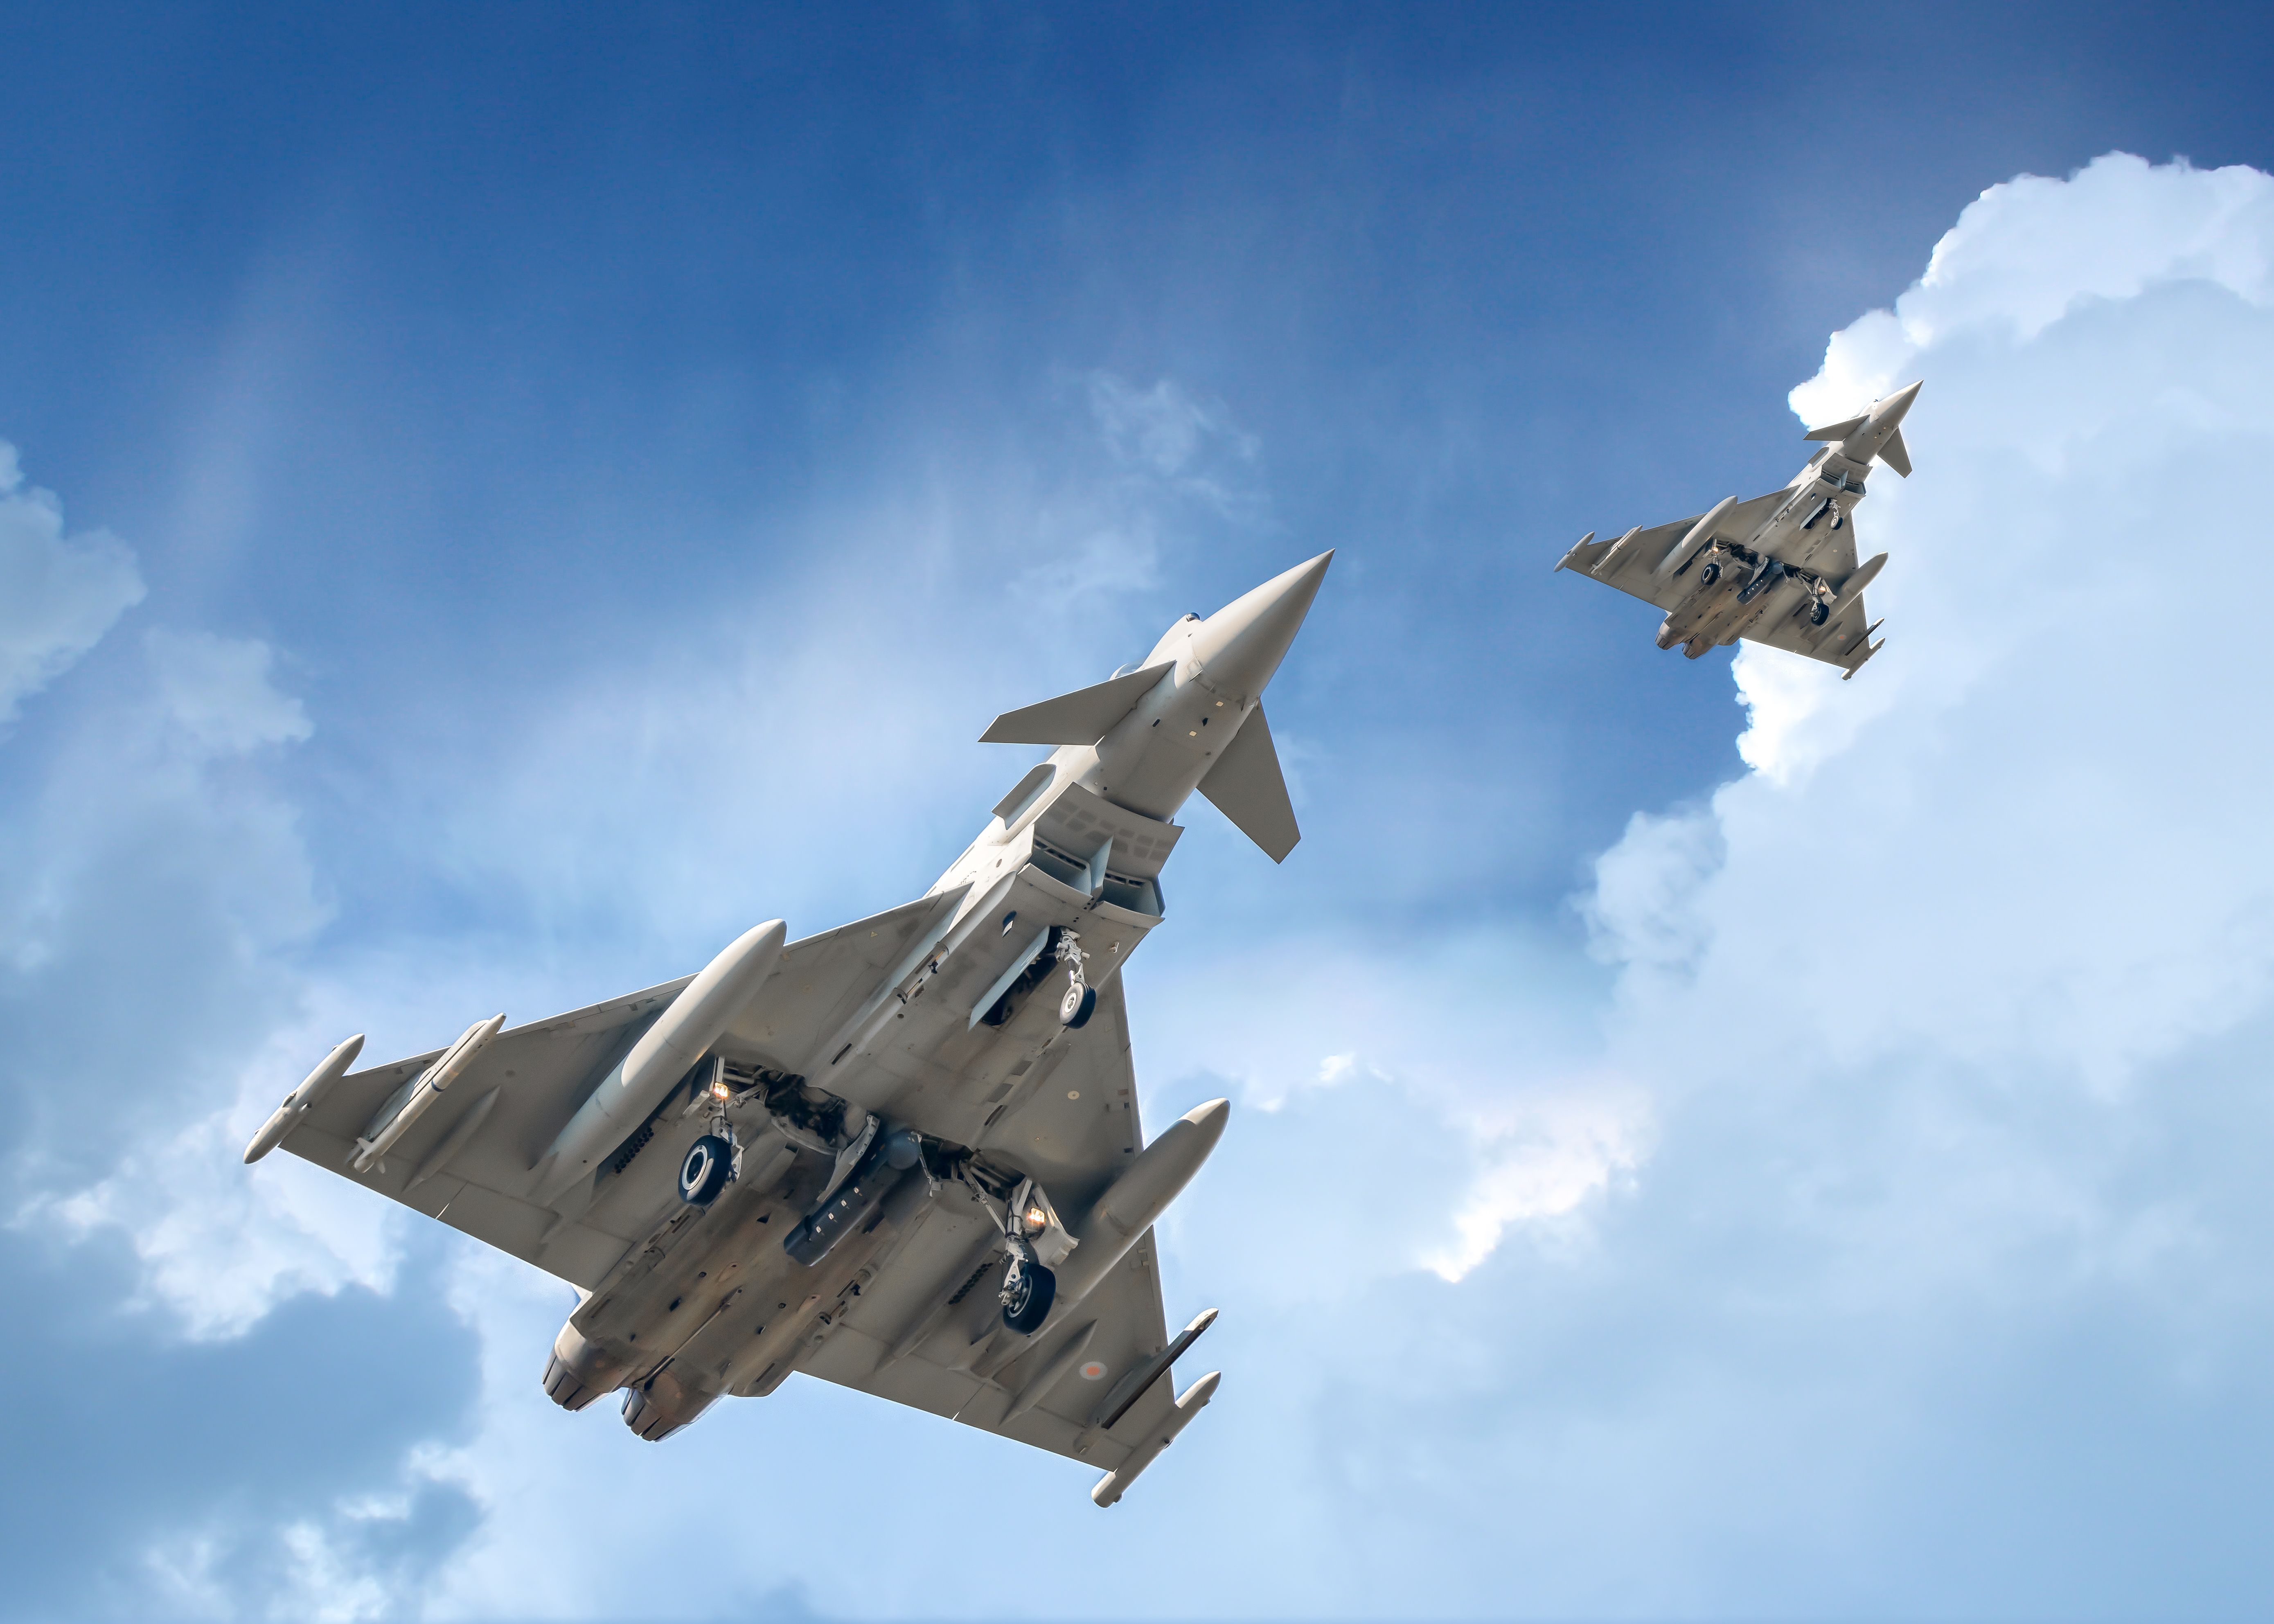 Eurofighter Typhoon with canards